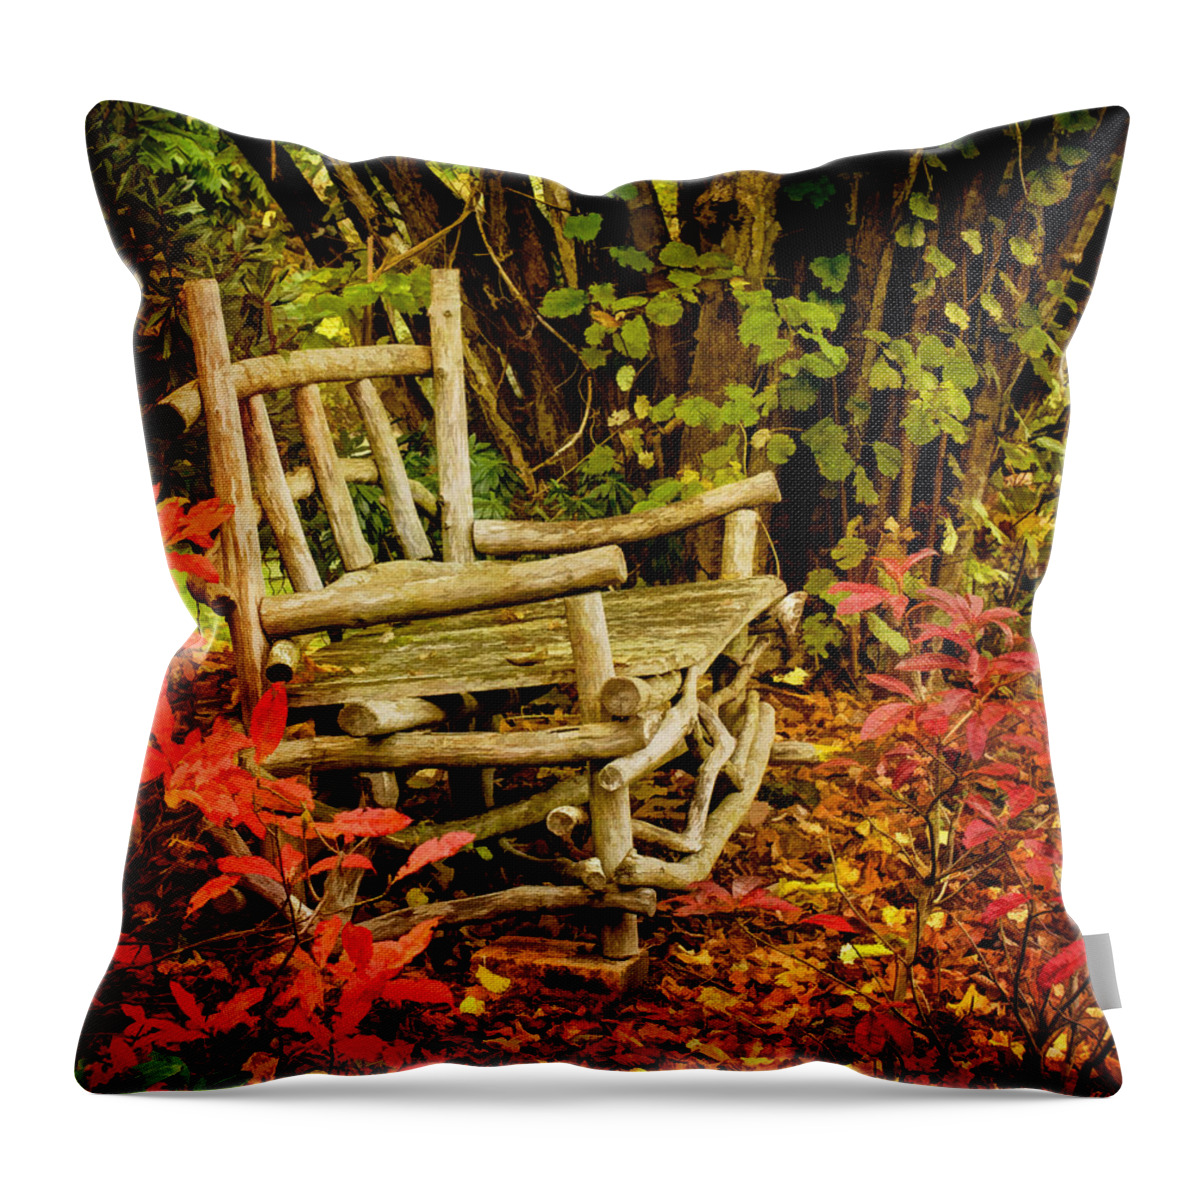 I Will Remember You Throw Pillow featuring the photograph I Will Remember You by Jordan Blackstone